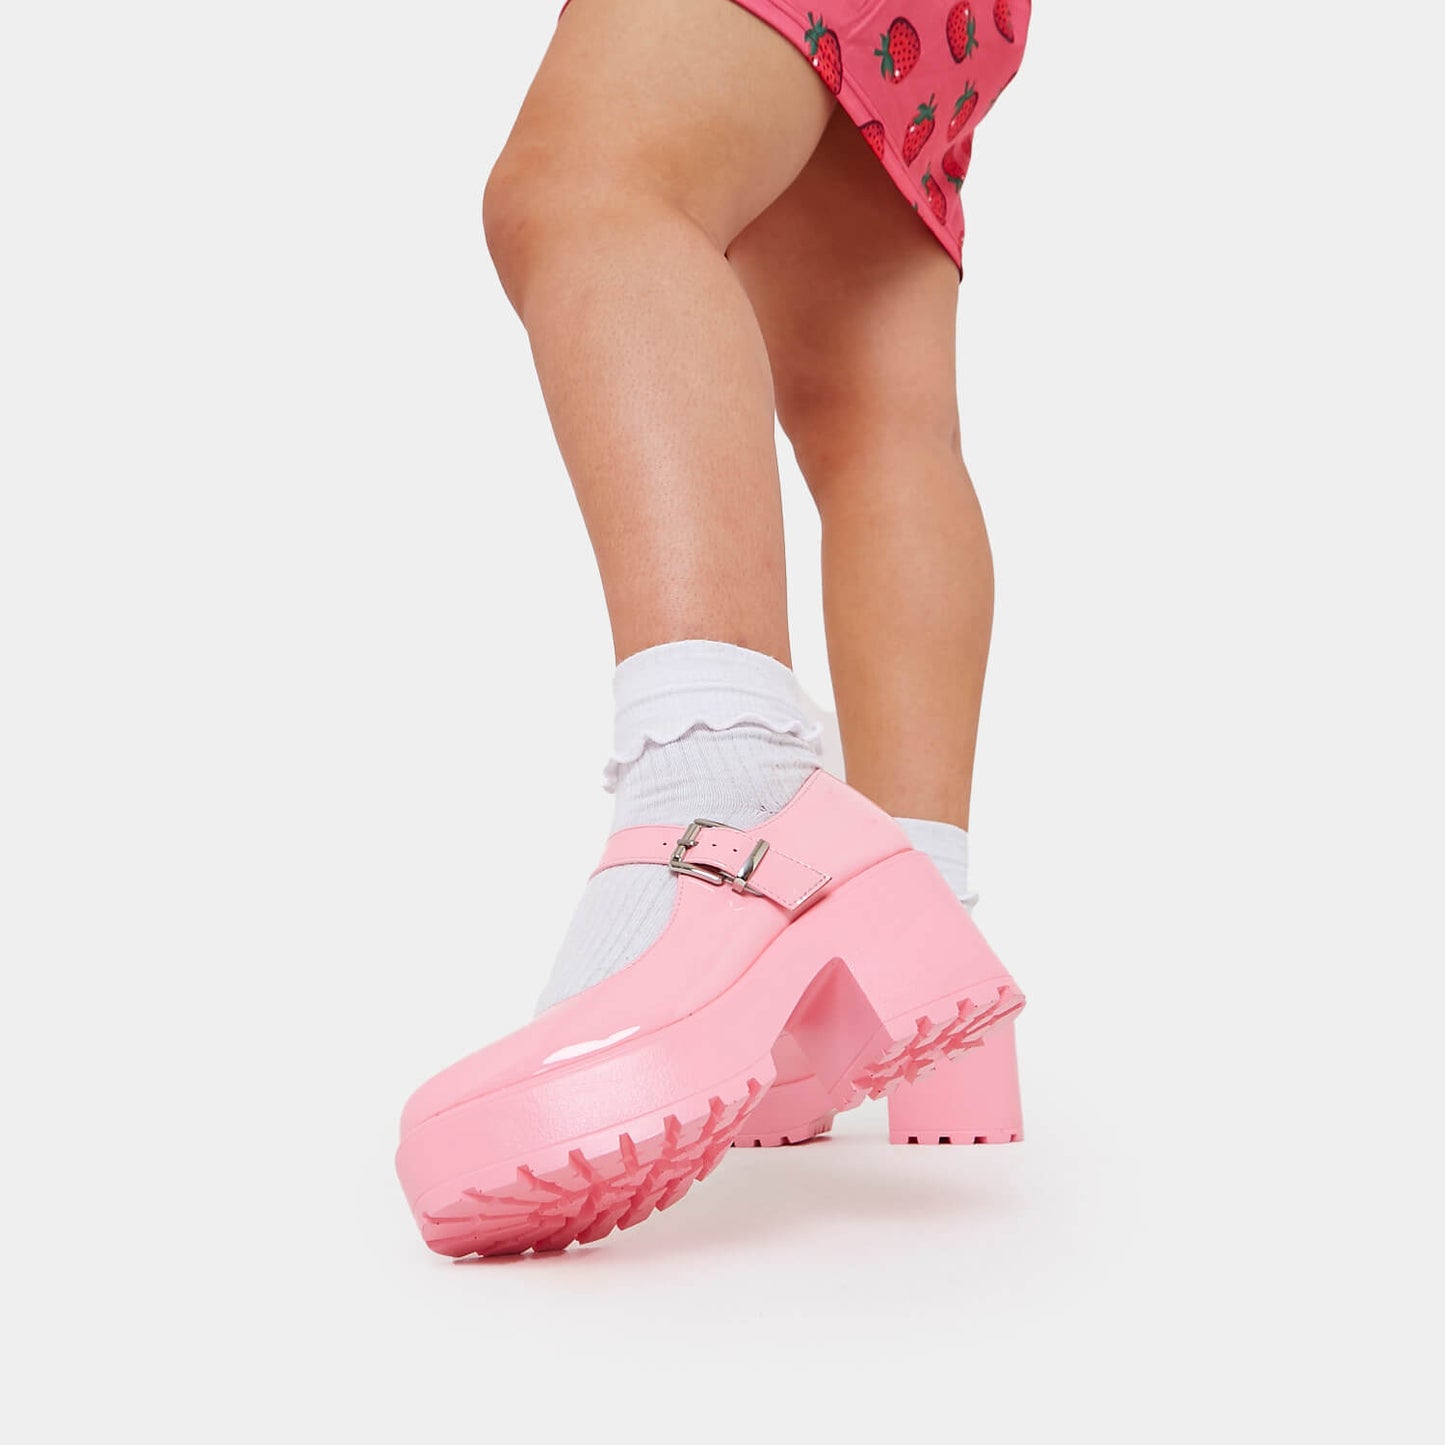 Tira Mary Jane Shoes 'Pink Princess Edition' - Mary Janes - KOI Footwear - Pink - Side View